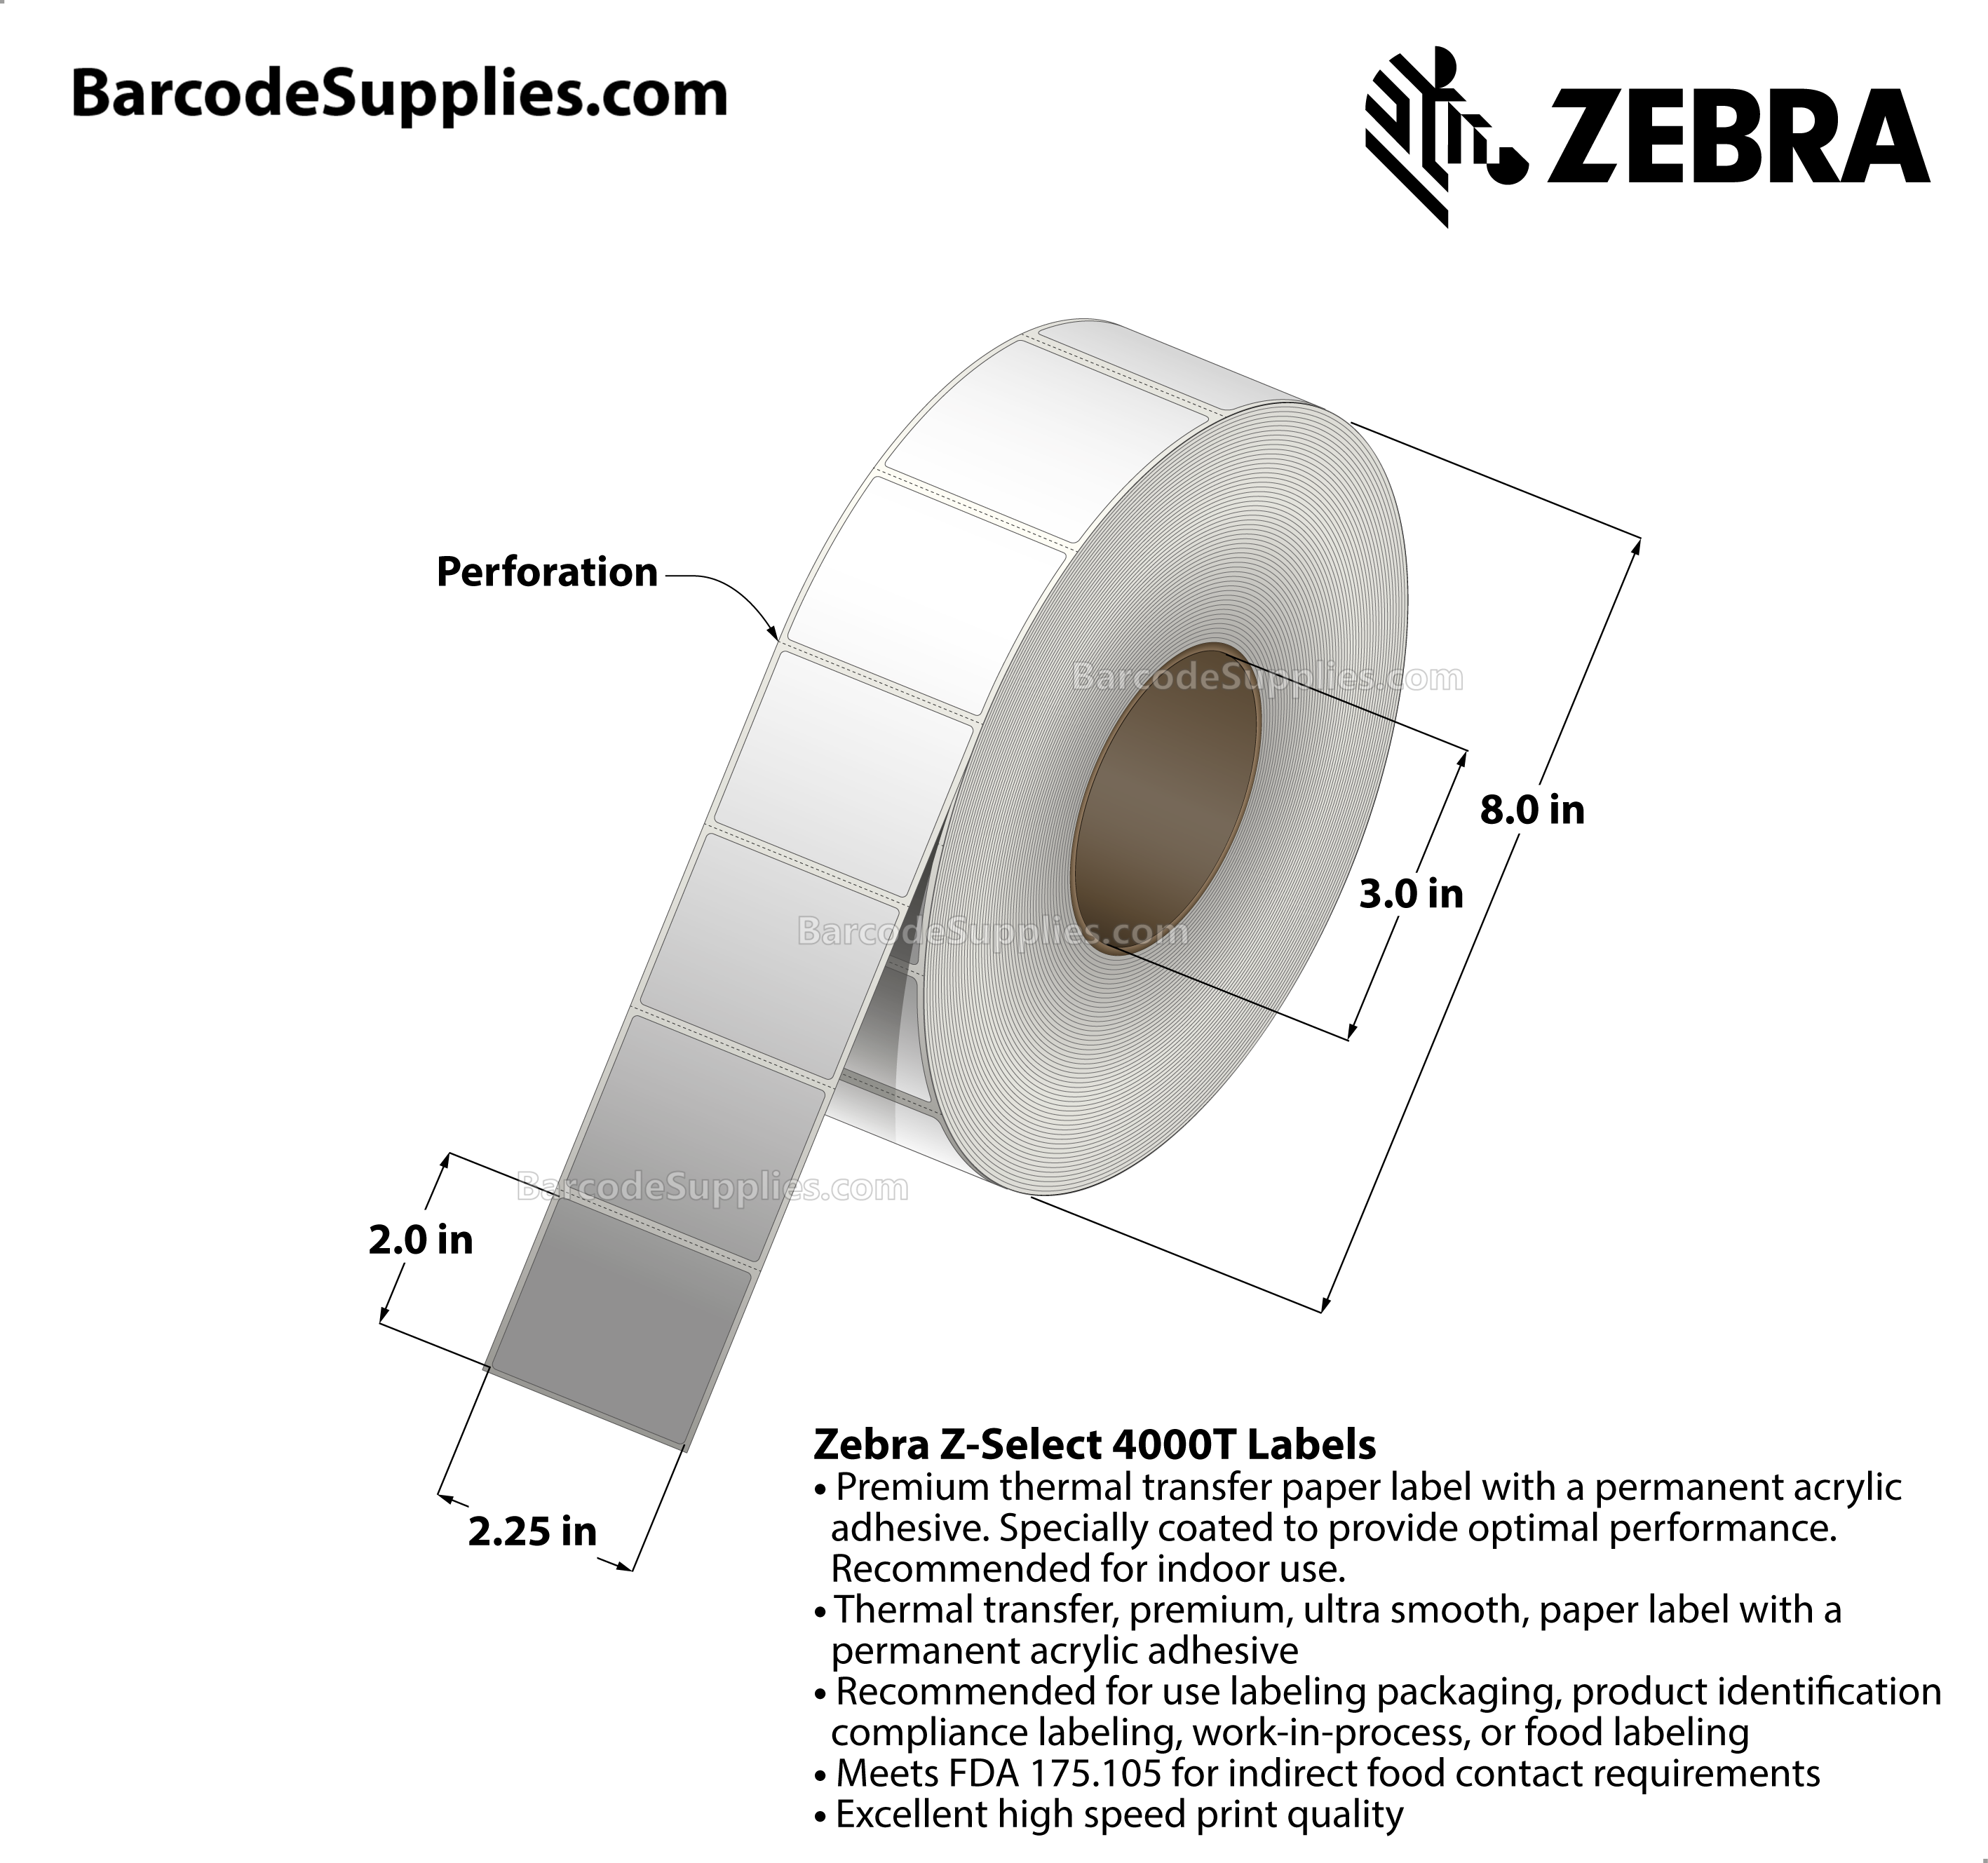 2.25 x 2 Thermal Transfer White Z-Select 4000T Labels With Permanent Adhesive - Perforated - 3292 Labels Per Roll - Carton Of 4 Rolls - 13168 Labels Total - MPN: 800622-205